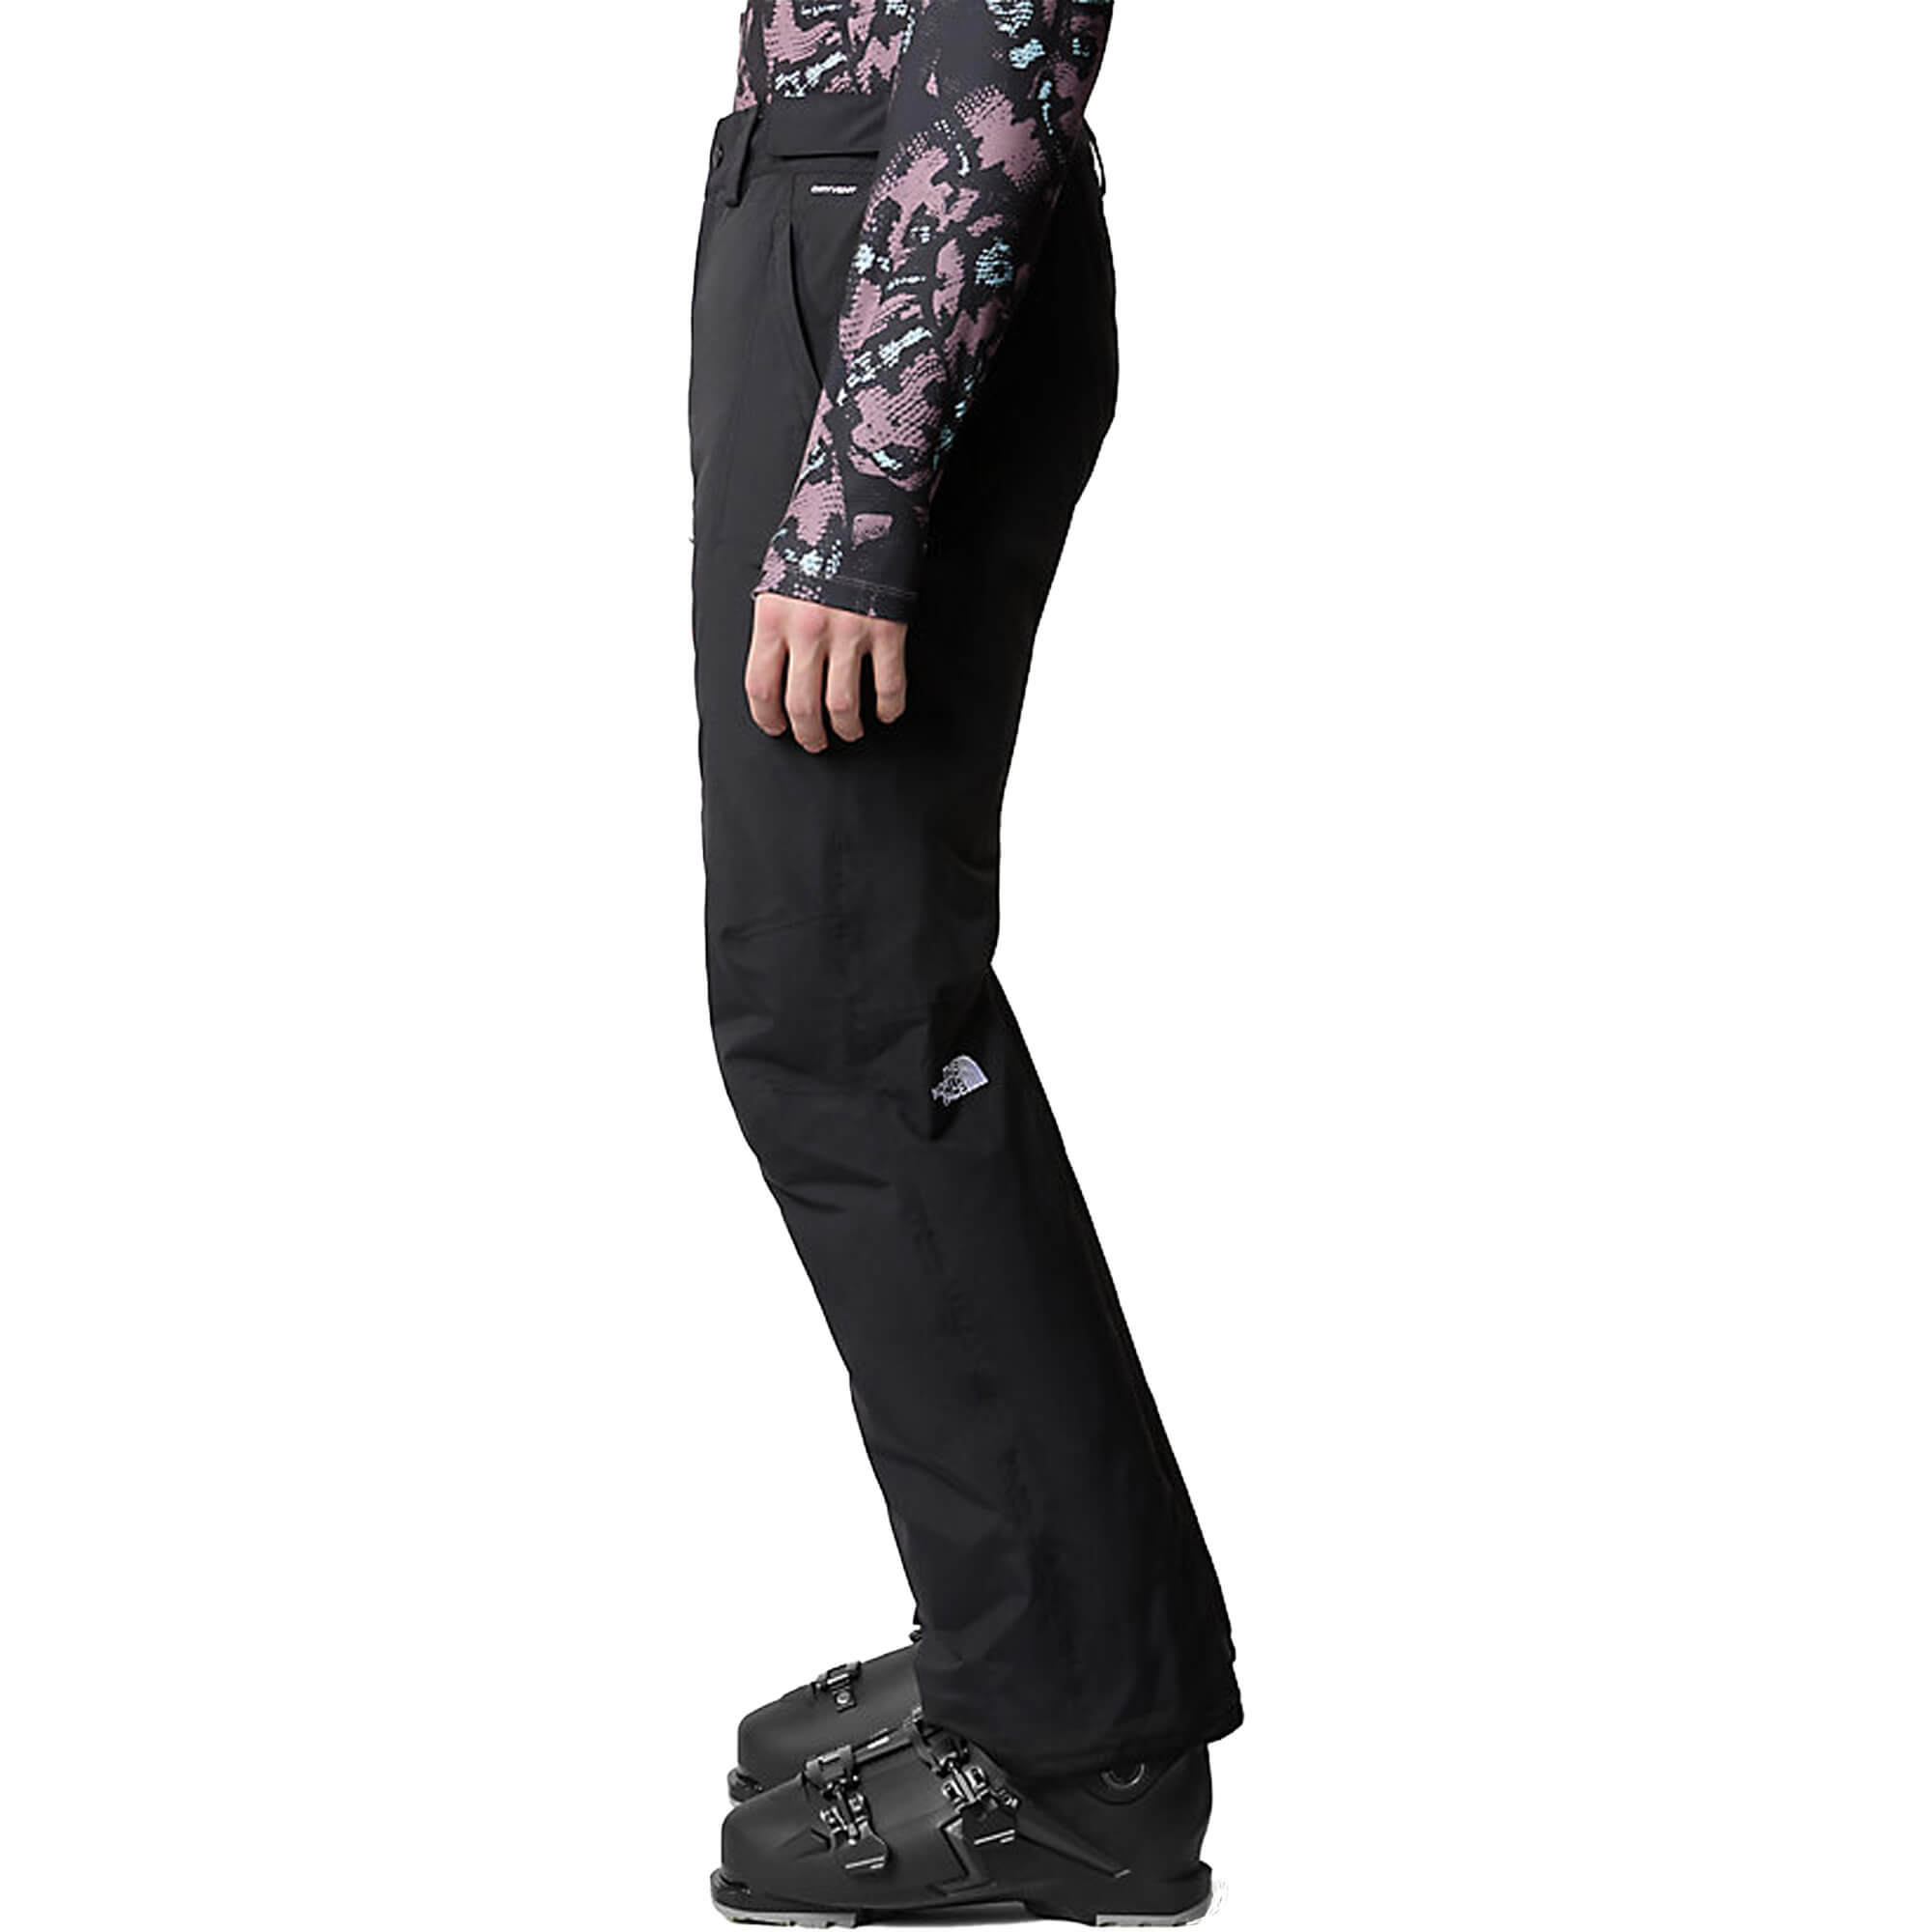 The North Face Freedom Men's Ski/Snowboard Pants